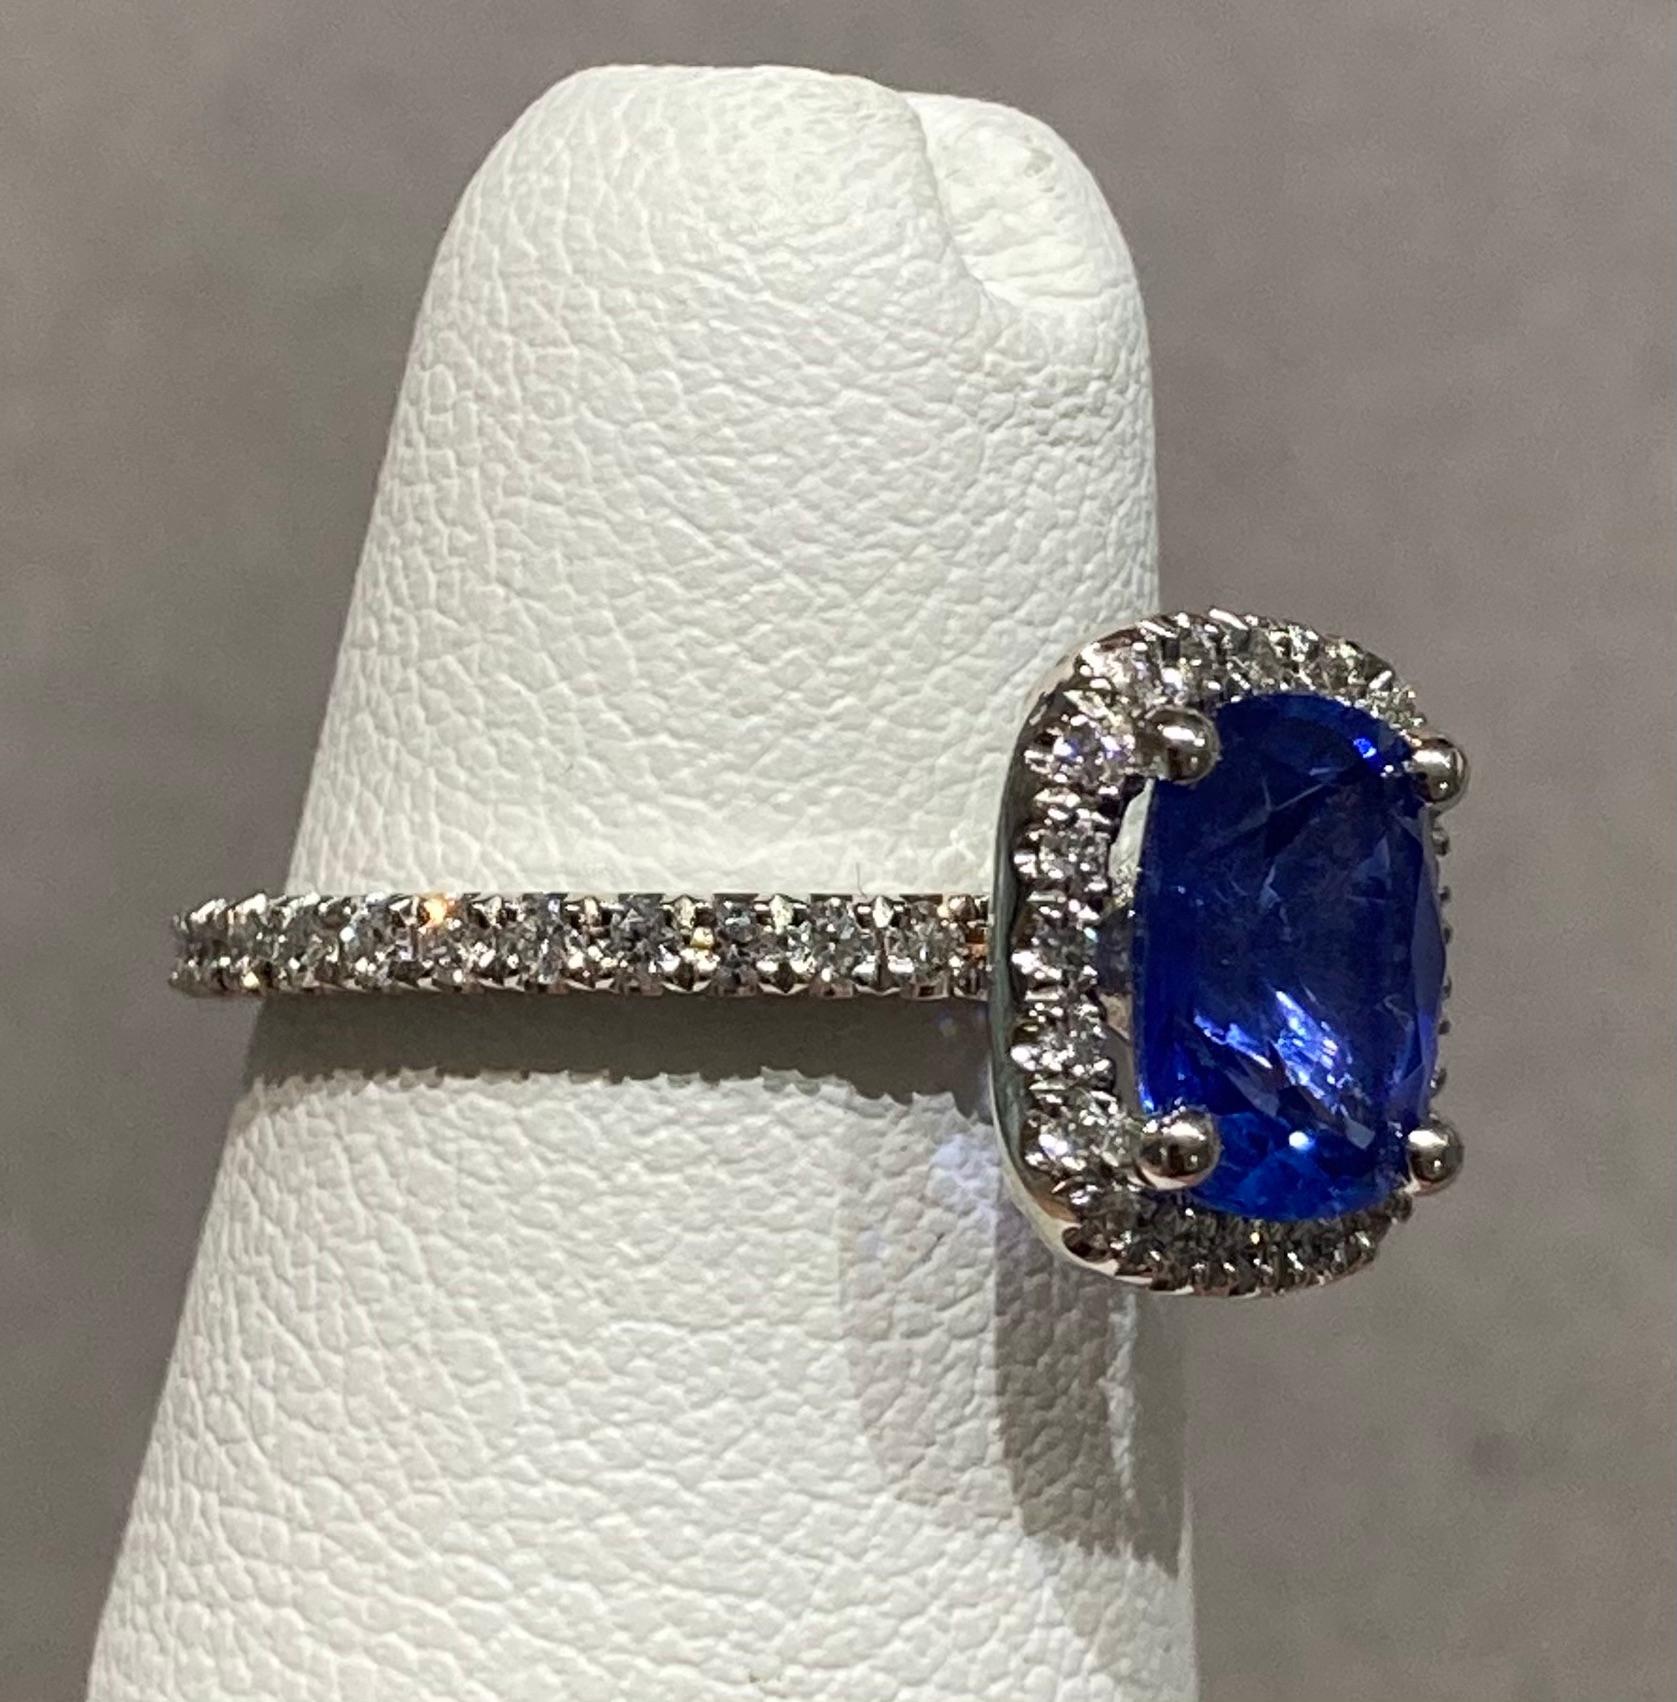 14k White gold sapphire & diamond halo ring featuring a 2.01ct sapphire set with F color/VS clarity diamonds around it and down the shank that total a weight of 0.62cts.